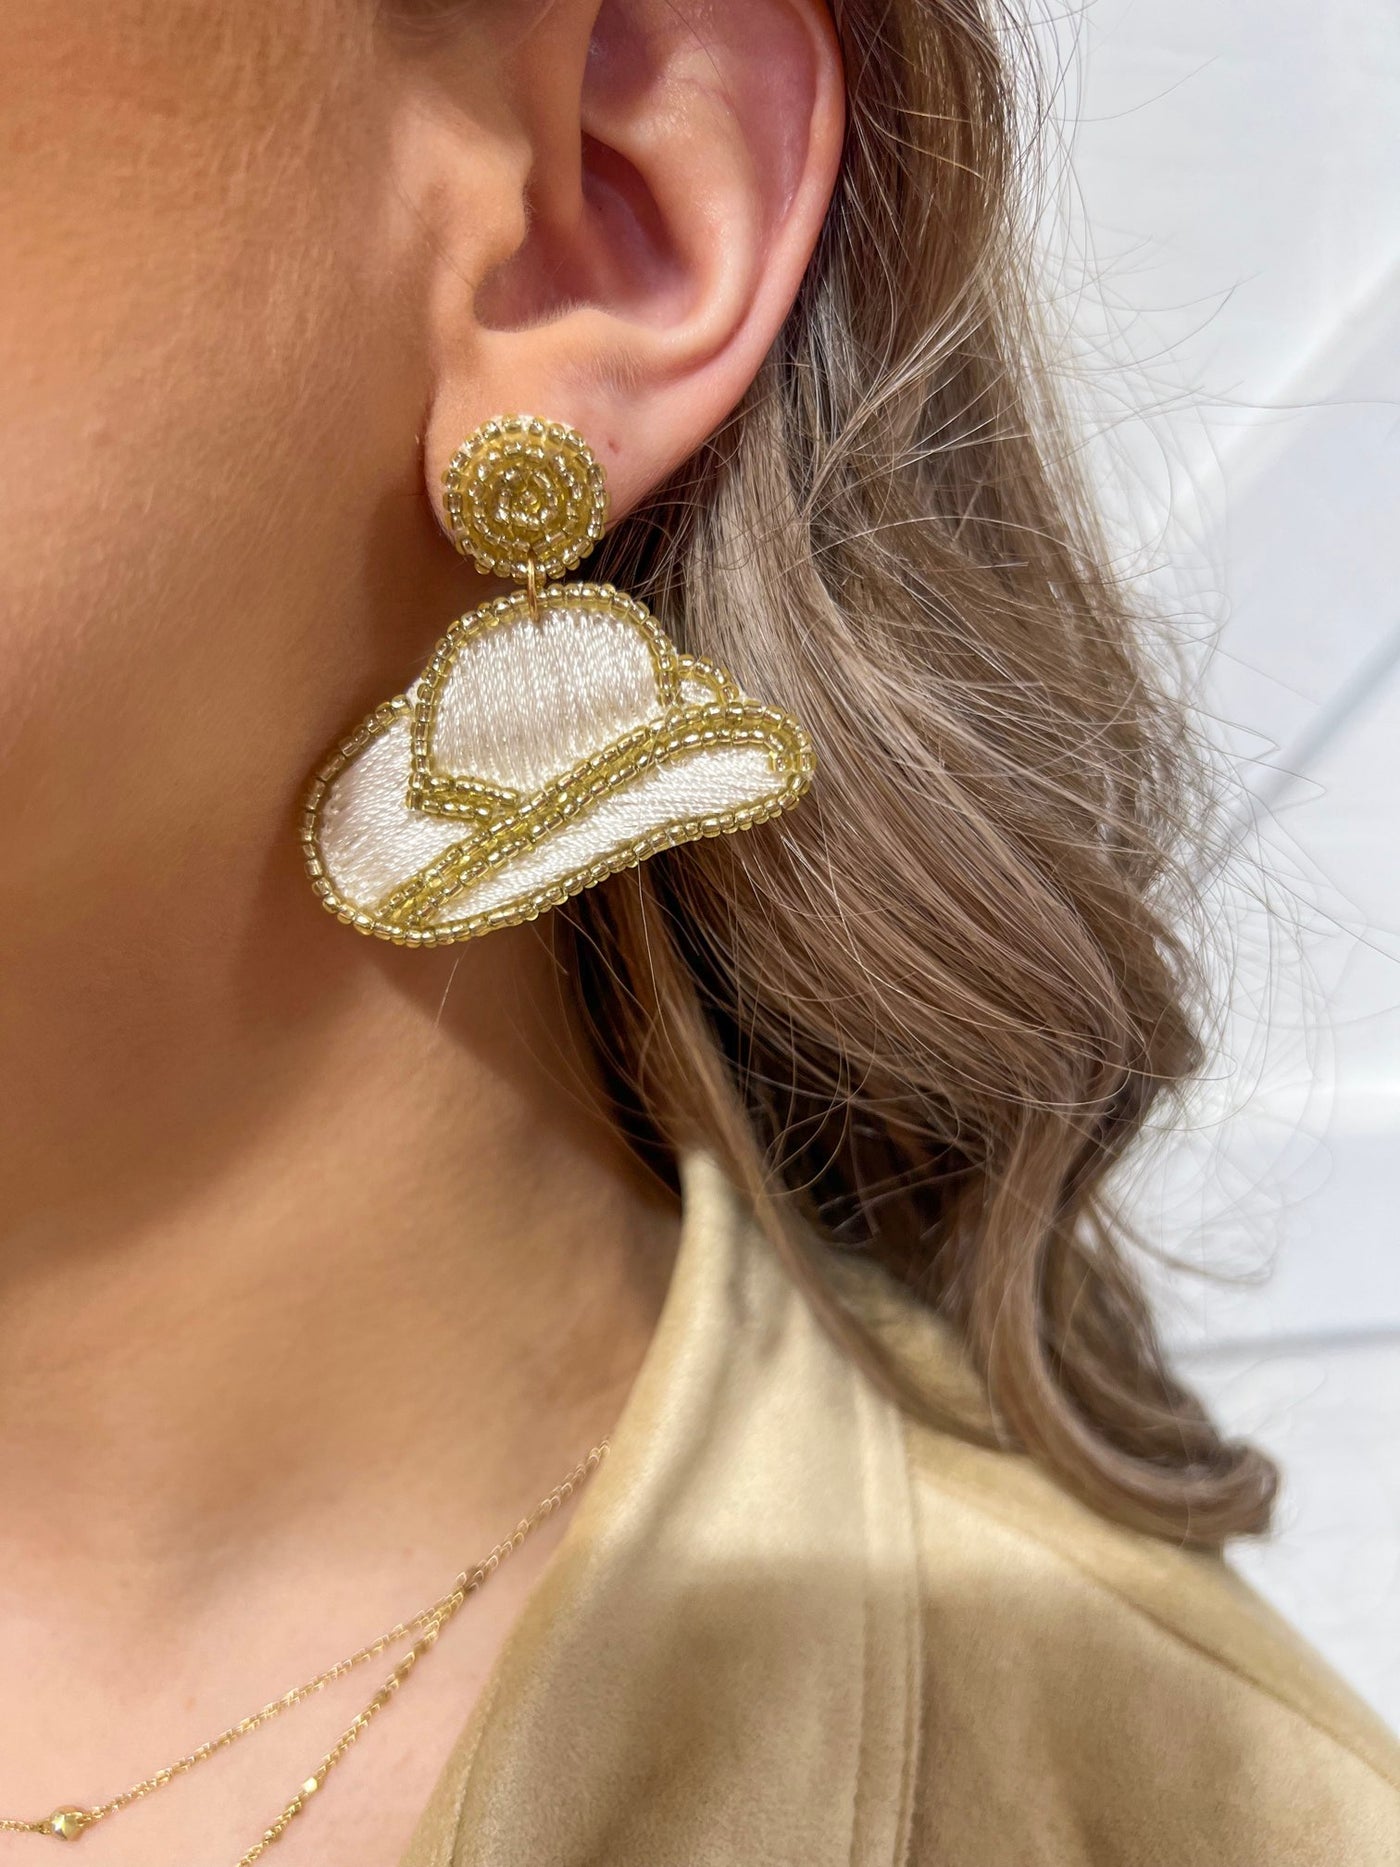 White and gold beaded earrings in shape of cowboy hat